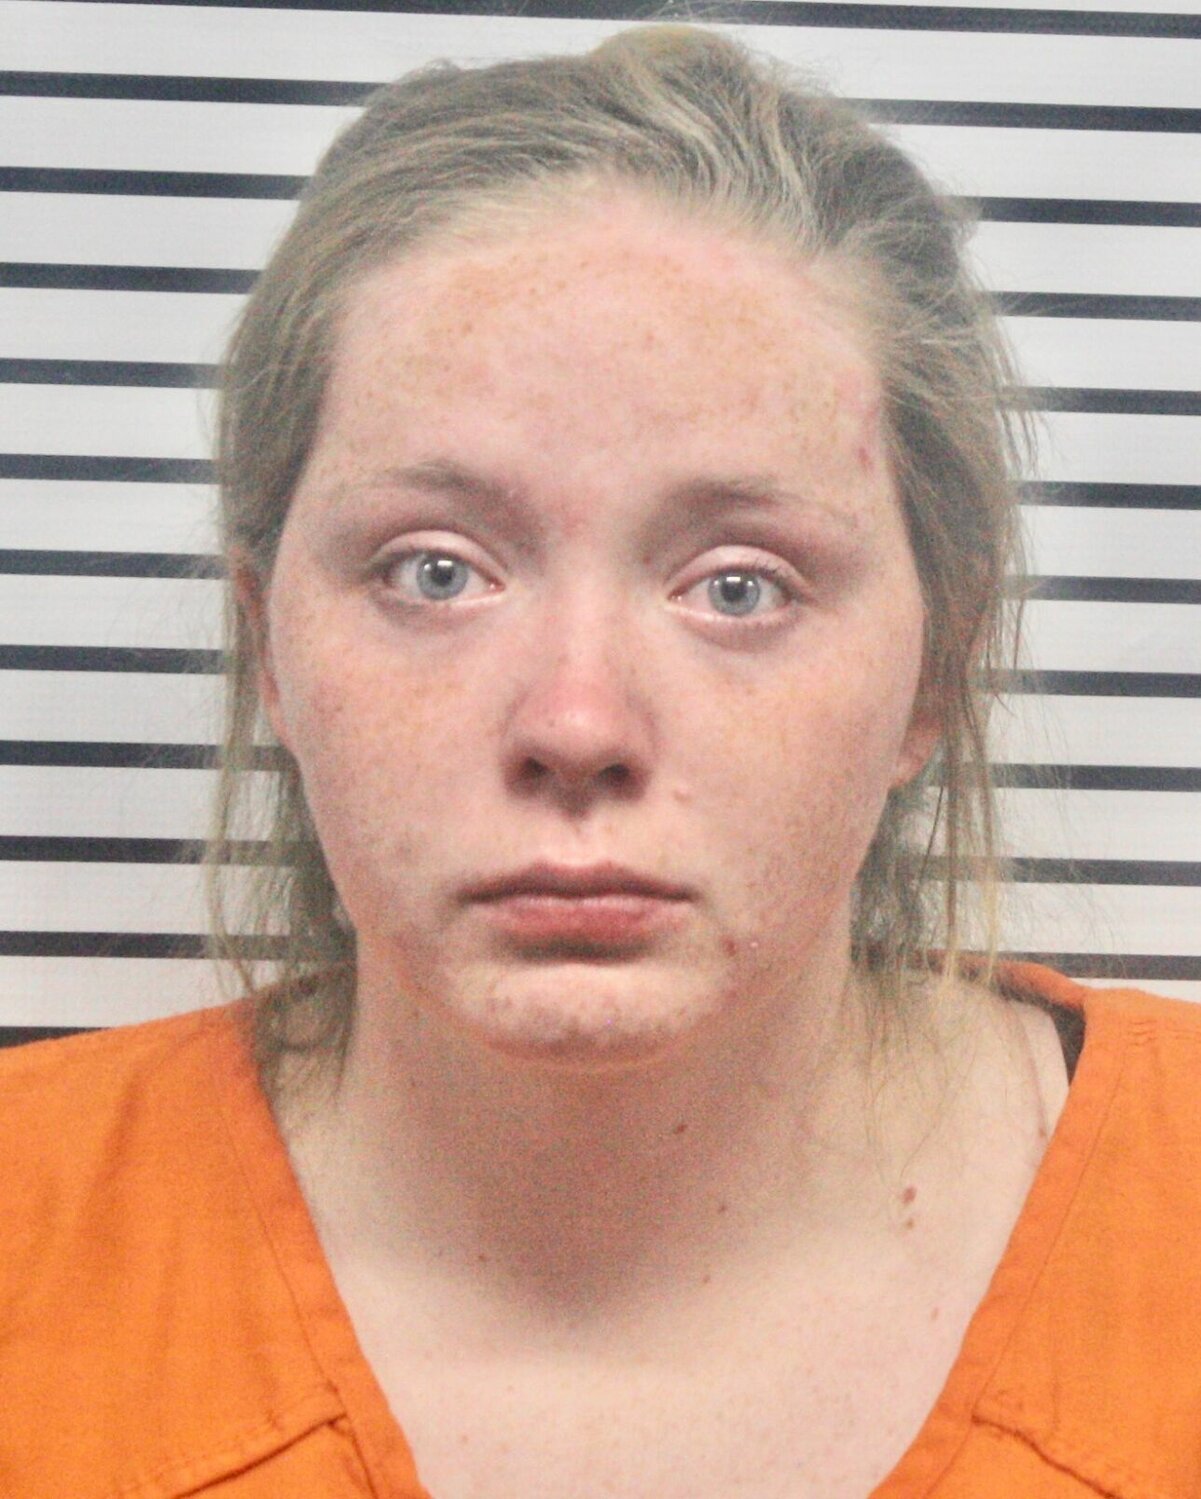 Three family members charged in alleged attack on woman West Plains Daily Quill